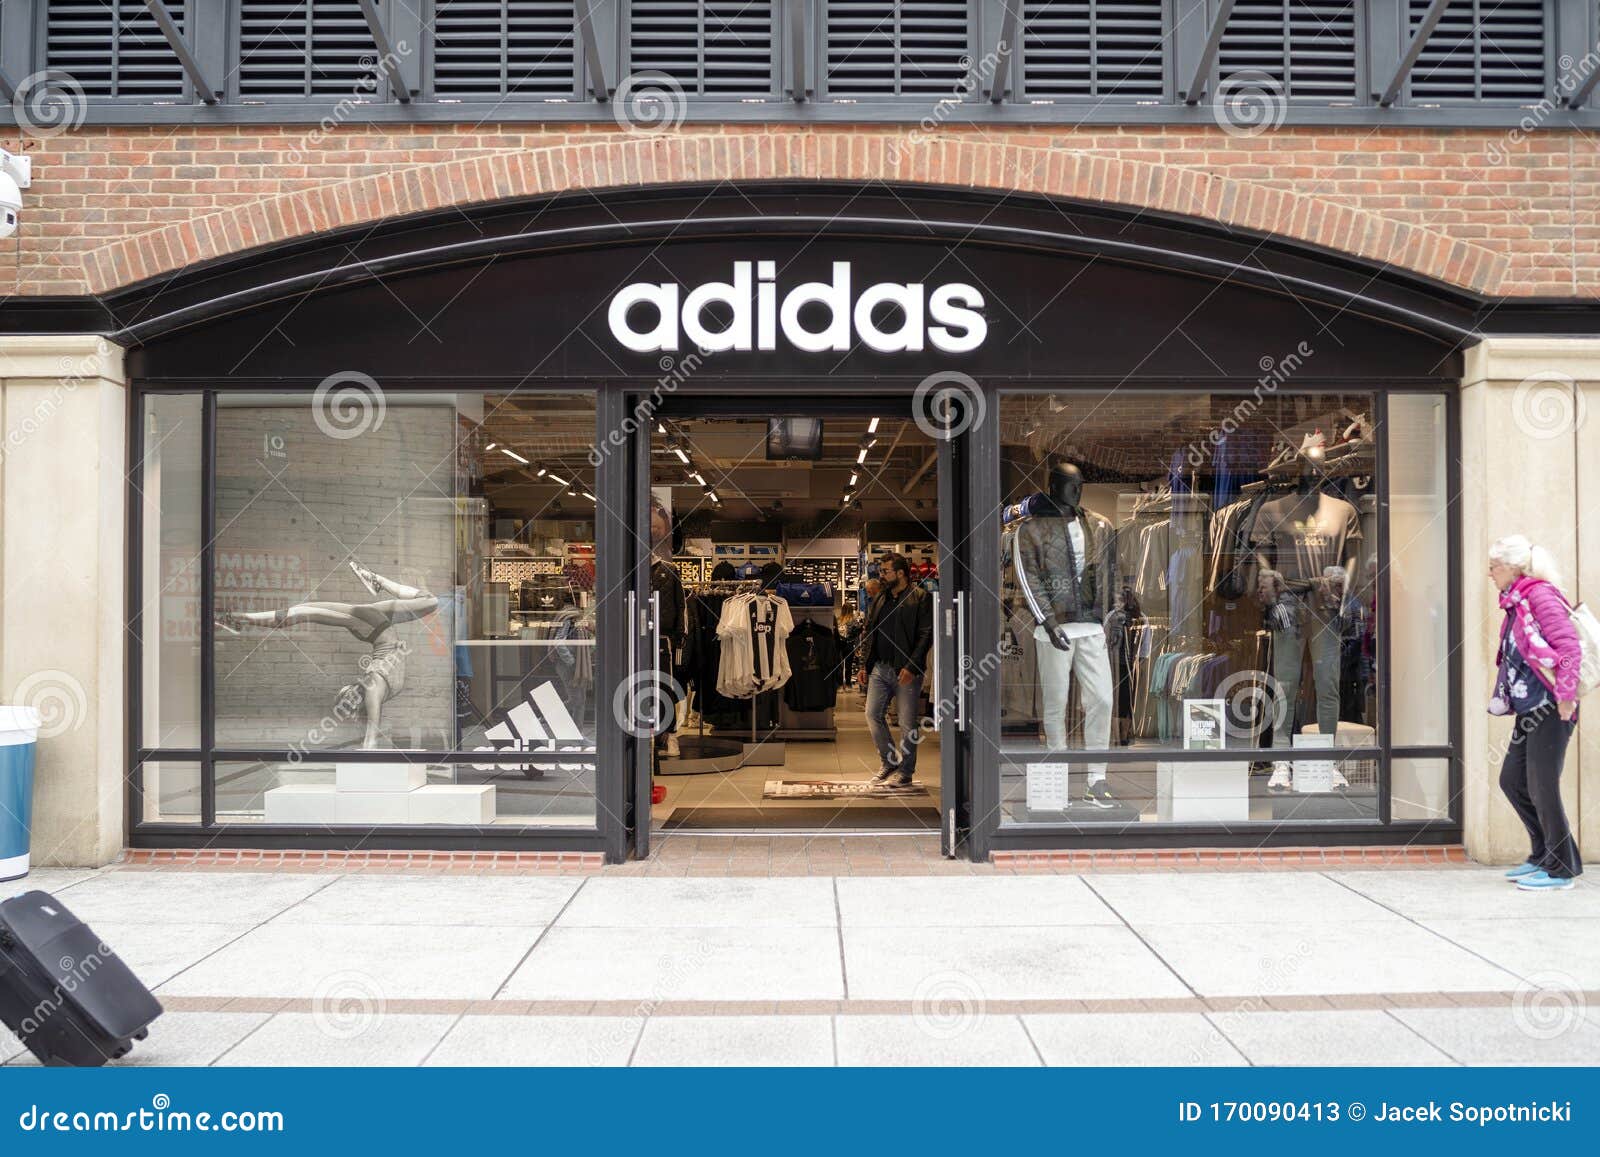 Entrance To Adidas Shop in Modern Shopping Mall Photo Image of icon, front: 170090413